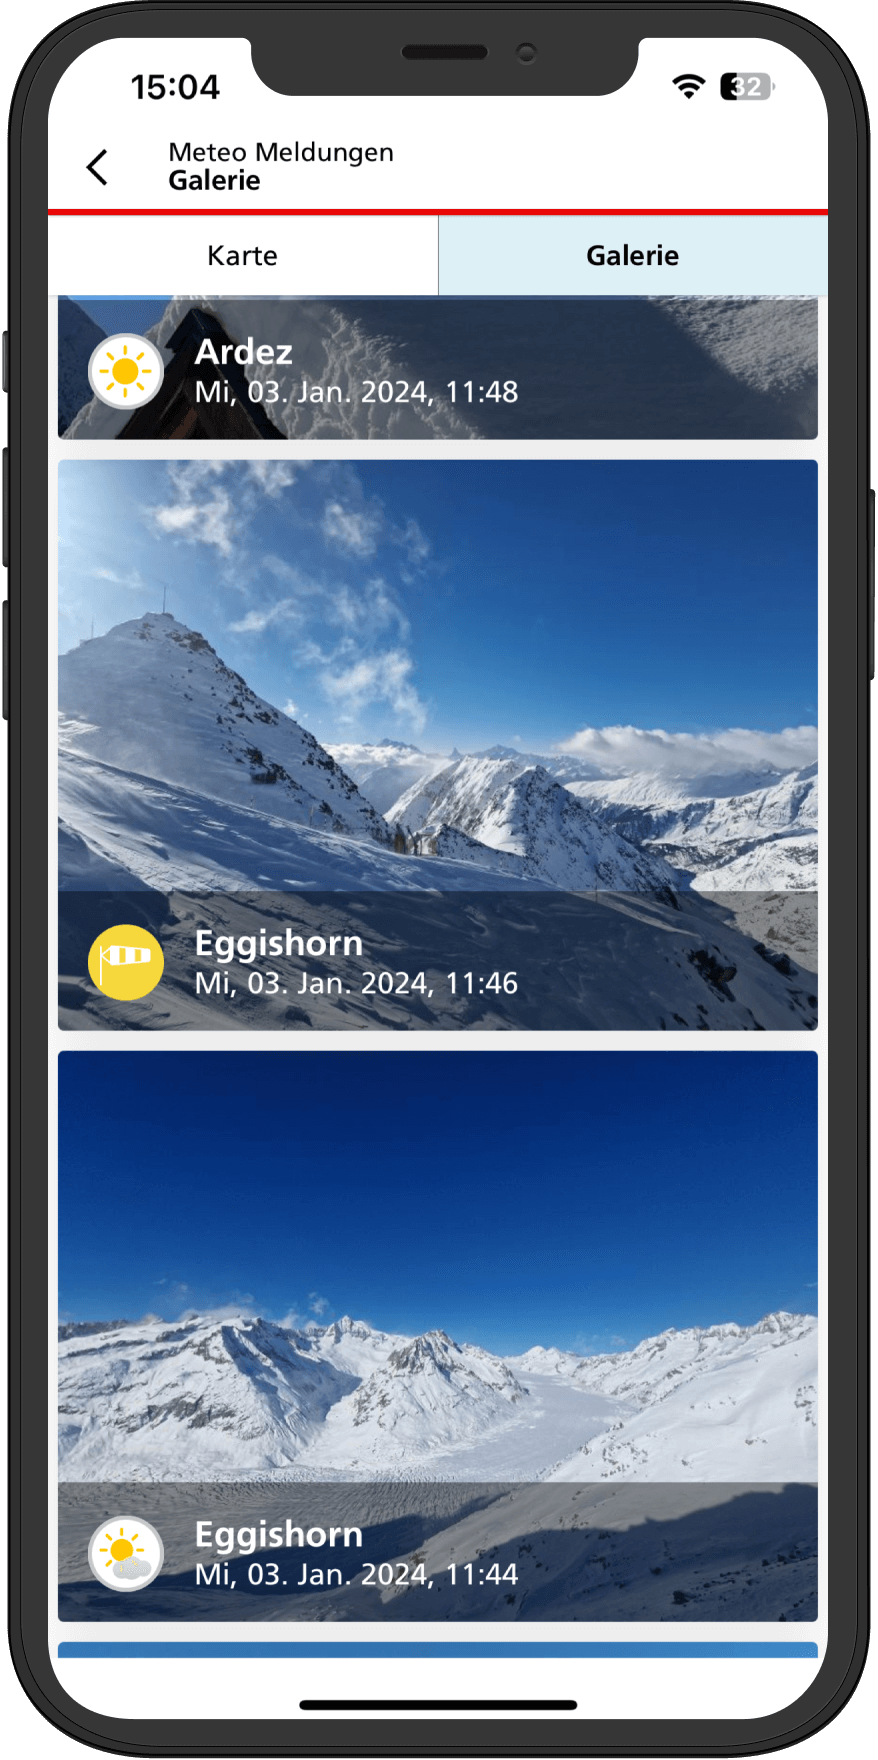 Screenshot of MeteoSwiss 2.0 in 2021. The screen shows a gallery of weather pictures taken by MeteoSwiss users